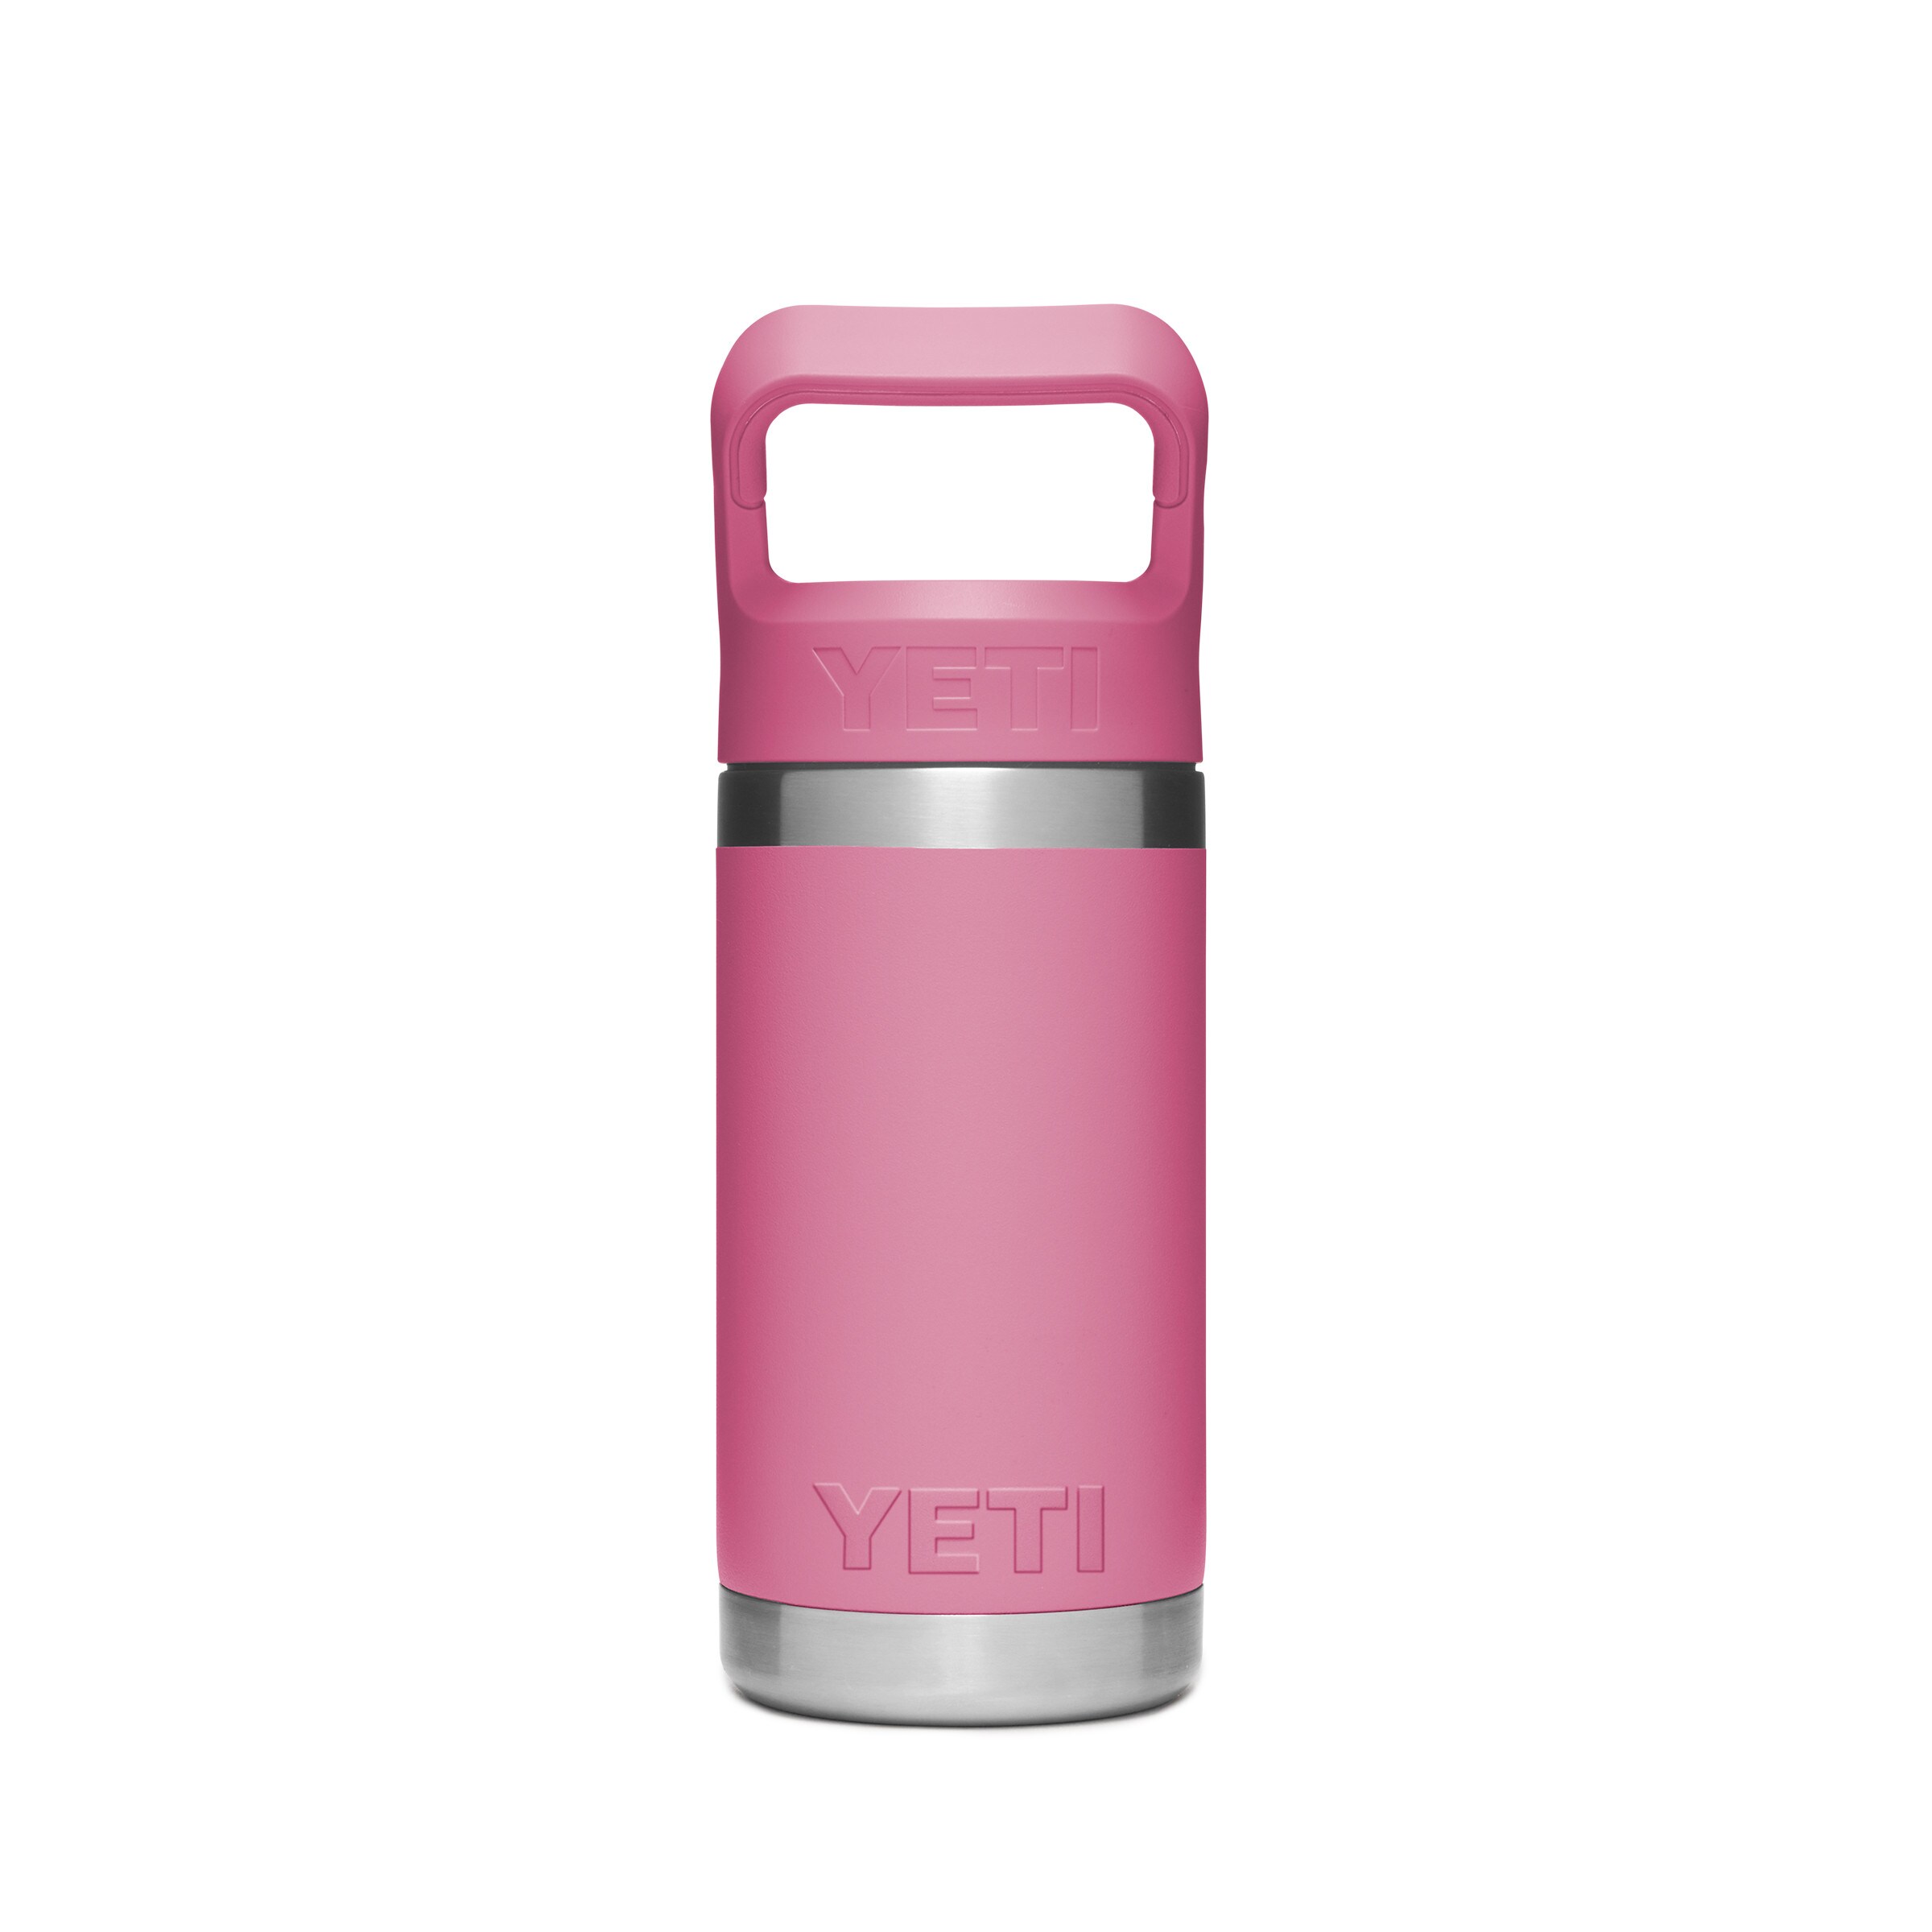 Pretty Comy Non-Slip Handle Bottle Silicone Handle for Yeti Tumbler Water Bottle Liquid Cup Handle Holder, Pink